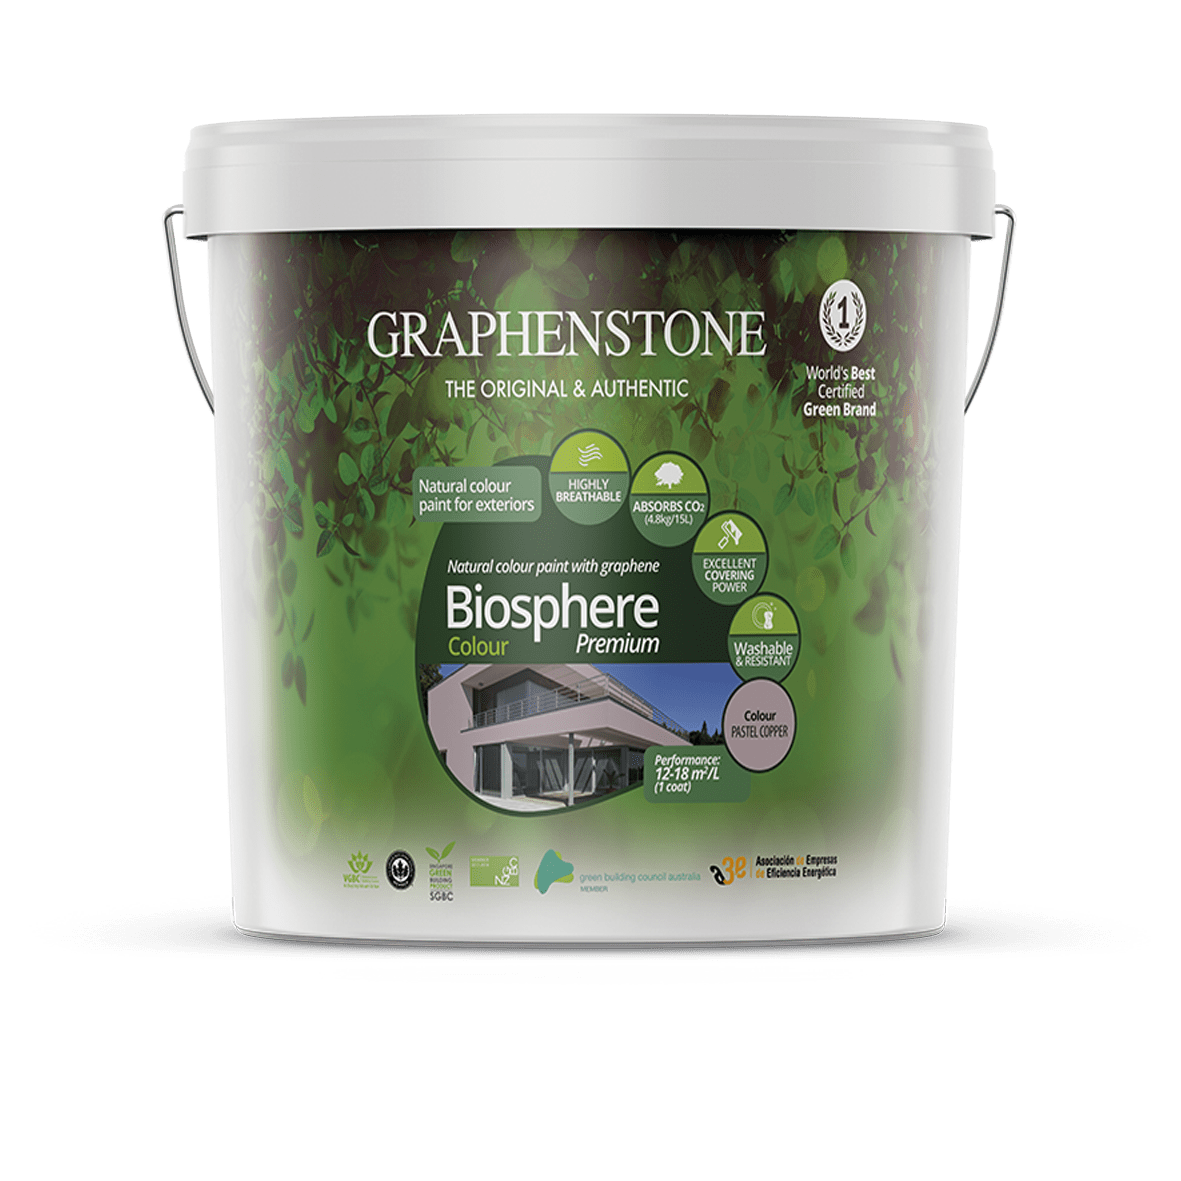 Biosphere Colour – Our highest quality lime paint for Exterior Masonry Highly breathable, absorbs CO2*, in White and 14 pastel colours